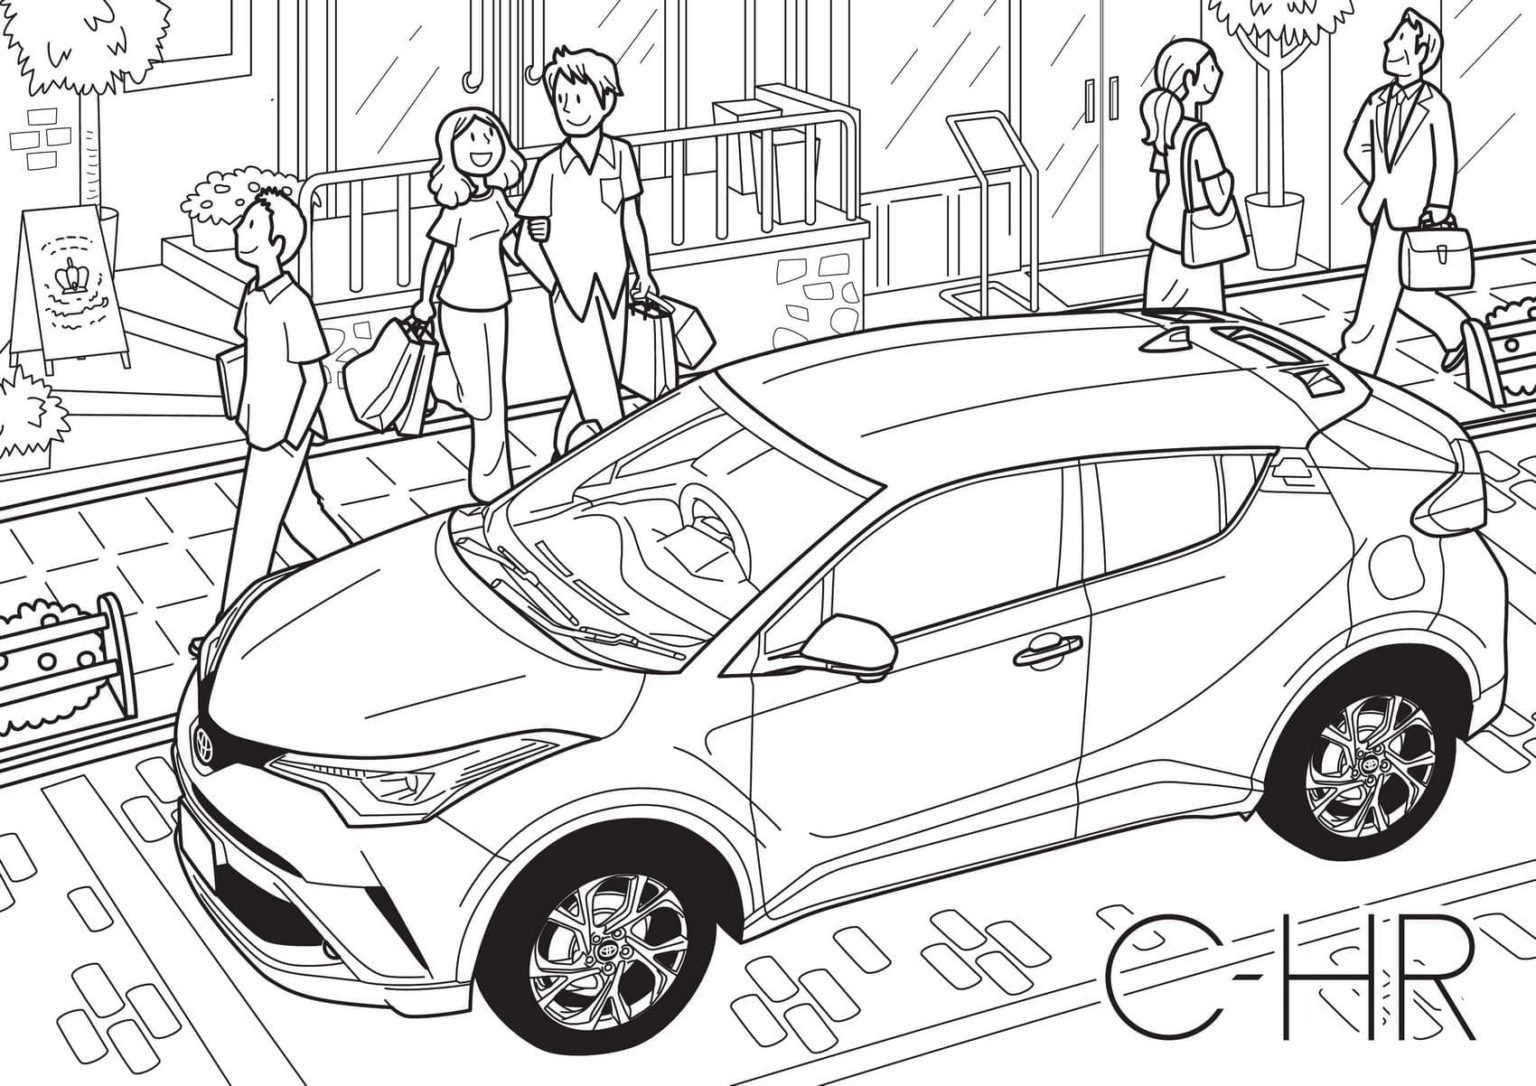 Toyota Coloring Pages  Printable coloring pages for Kids